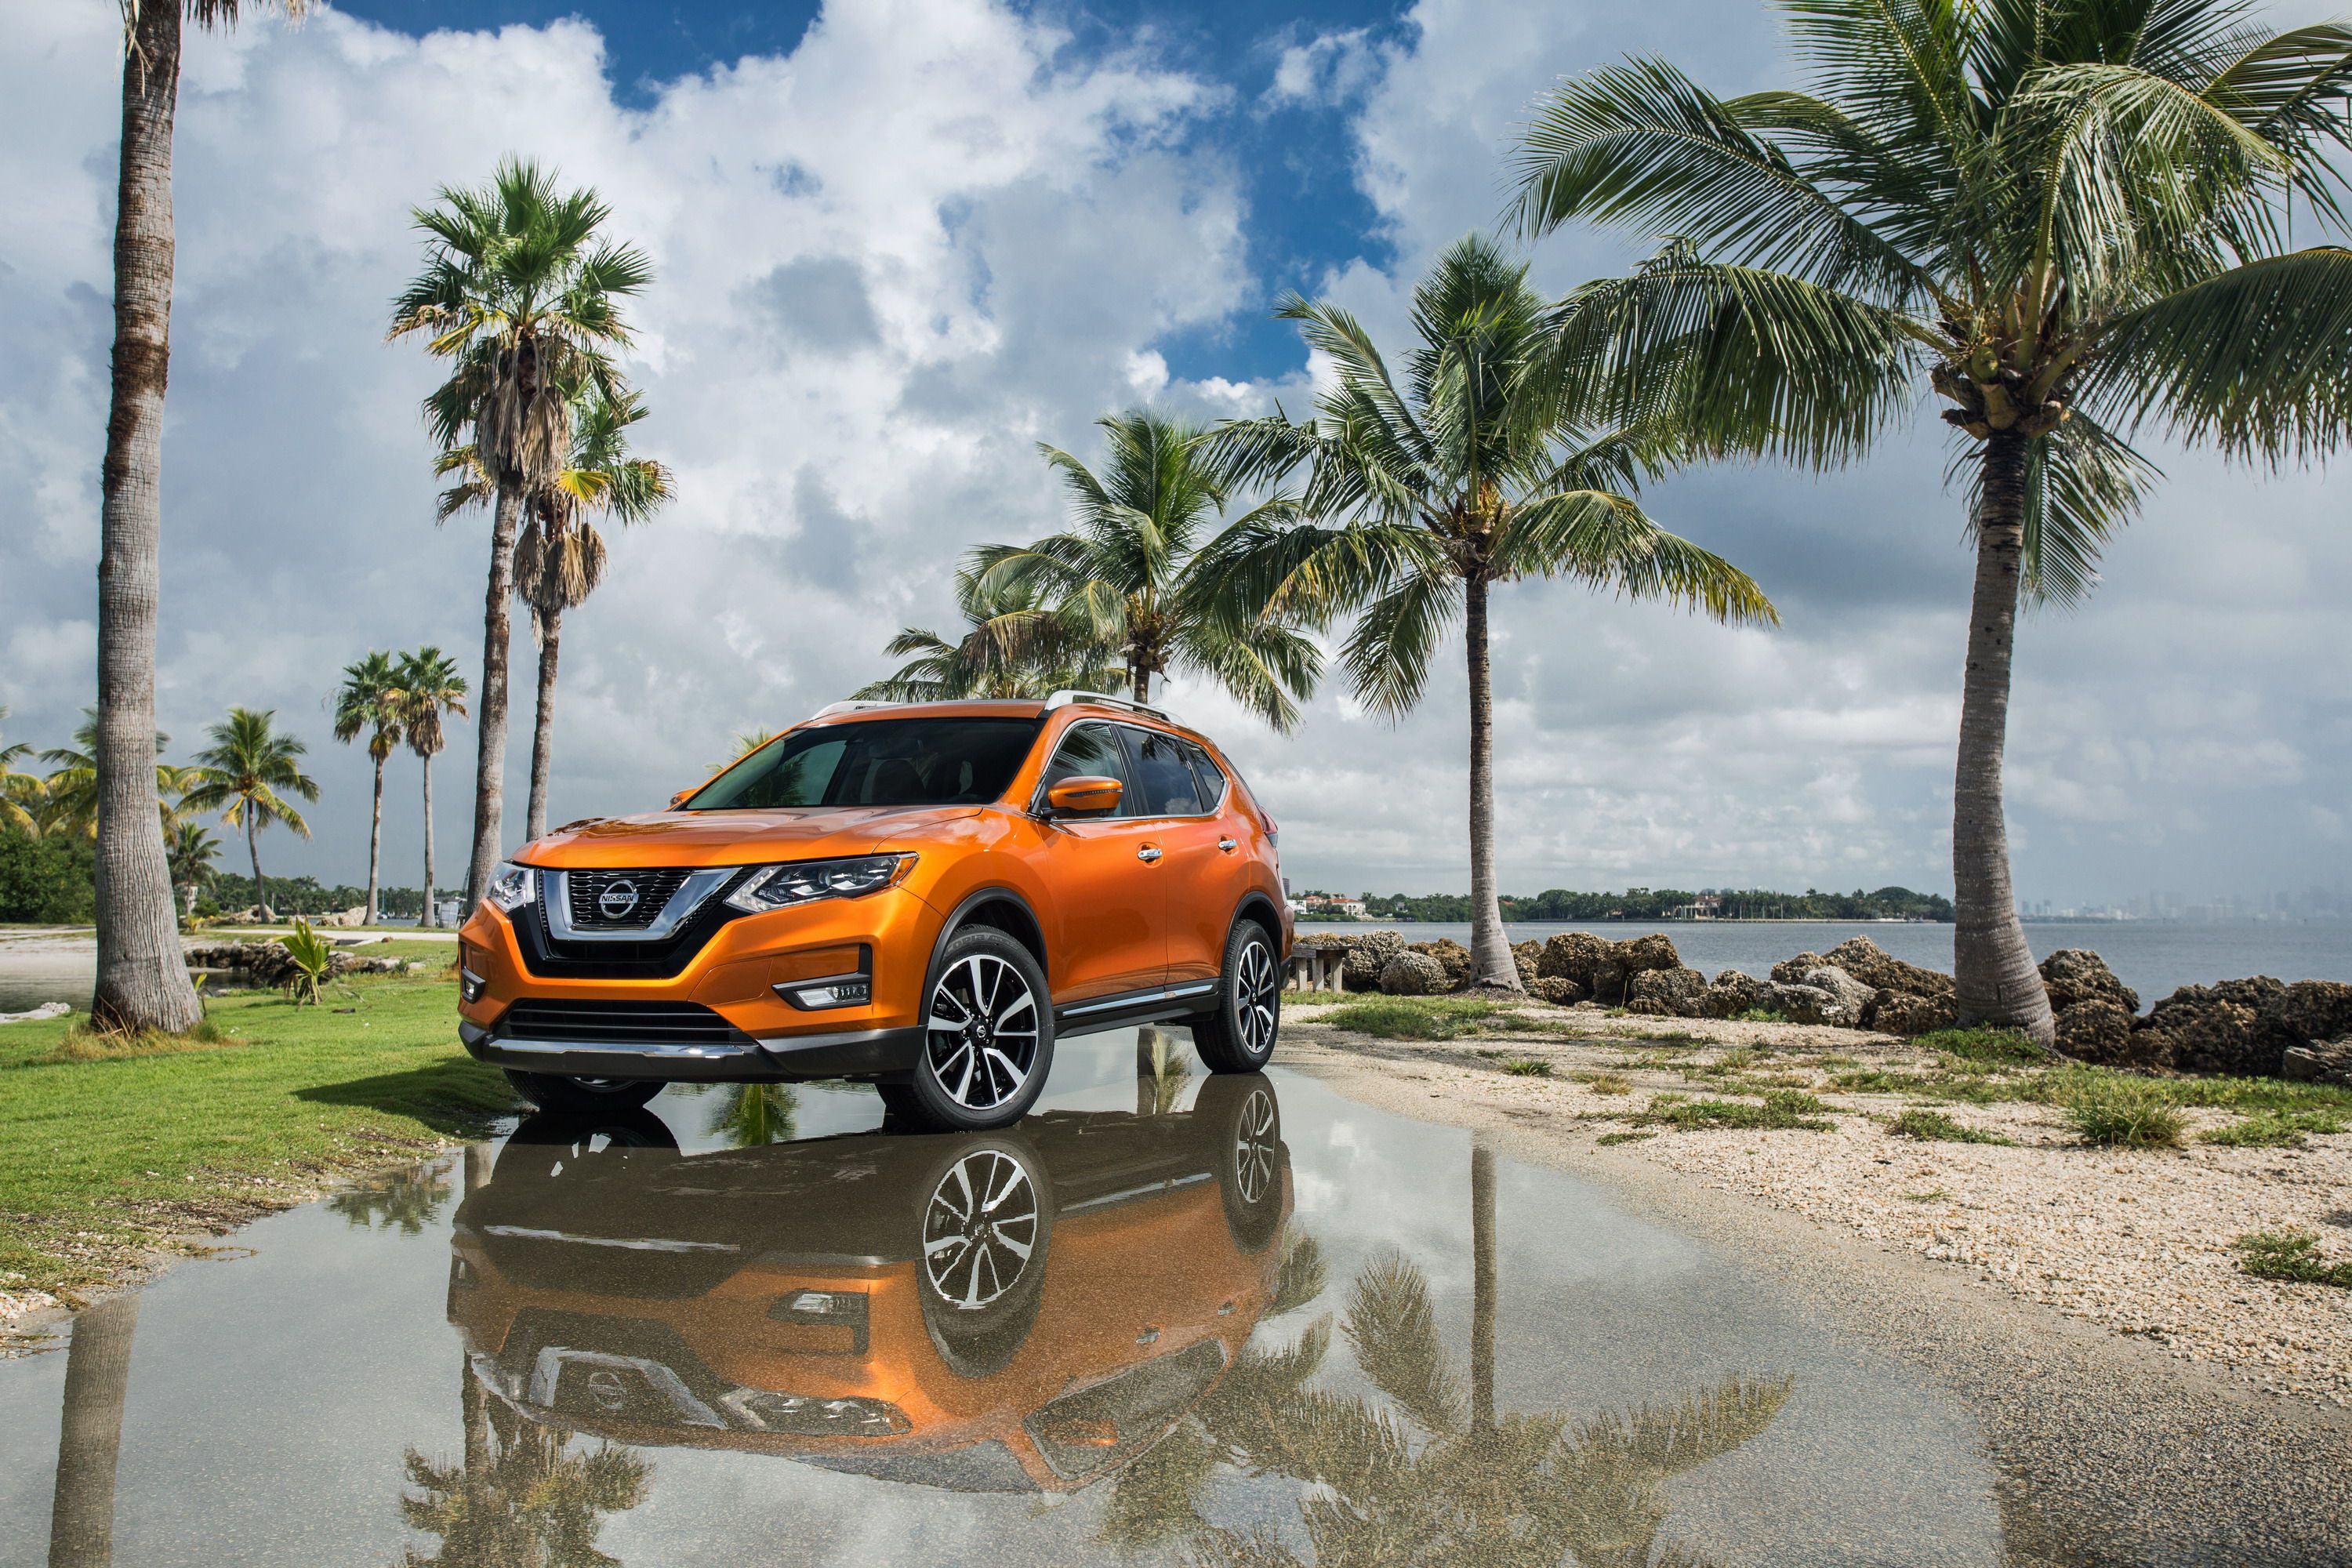 2020 Wallpaper of the Day: 2019 Nissan Rogue